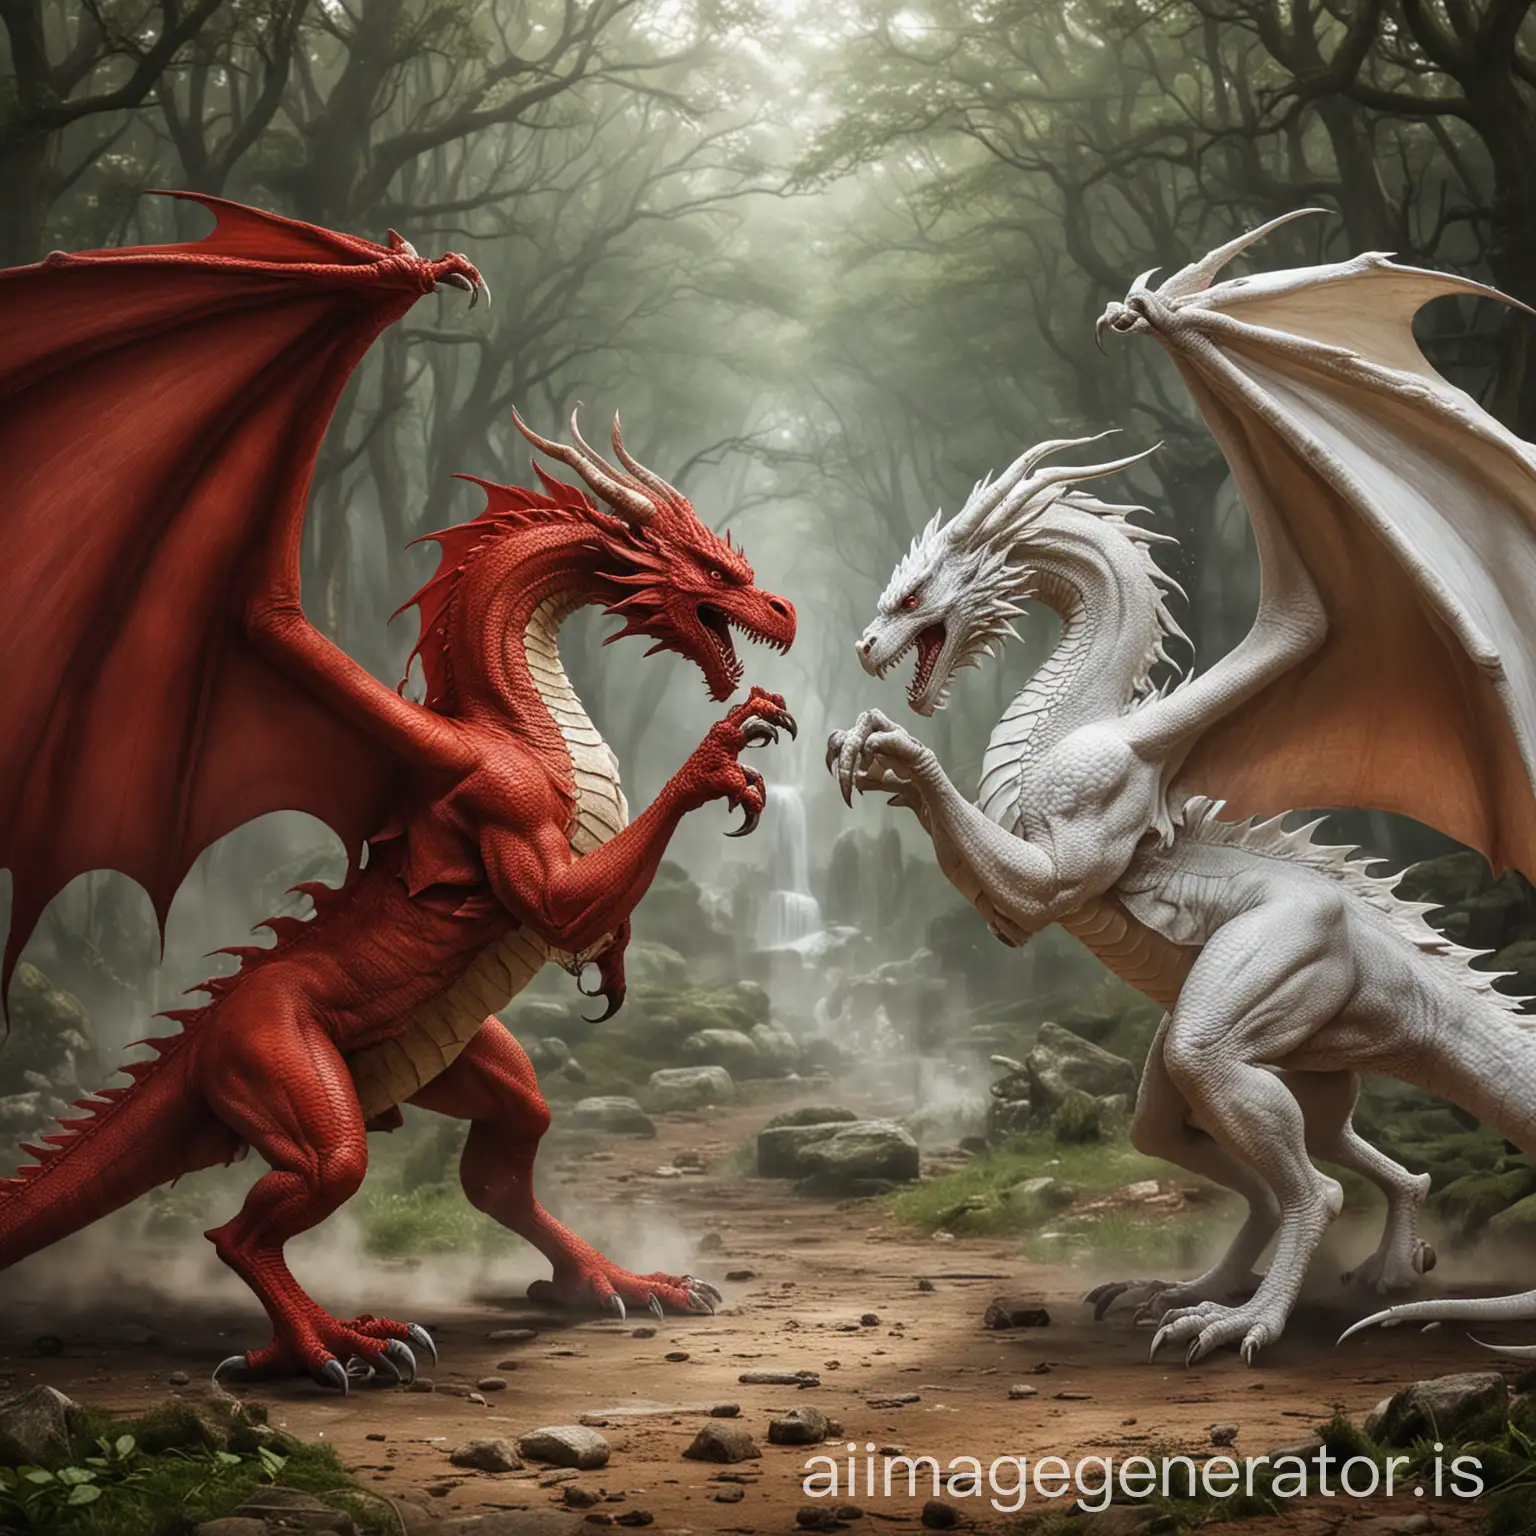 Epic-Battle-Welsh-Red-Dragon-vs-White-Dragon-Clash-in-Fiery-Confrontation